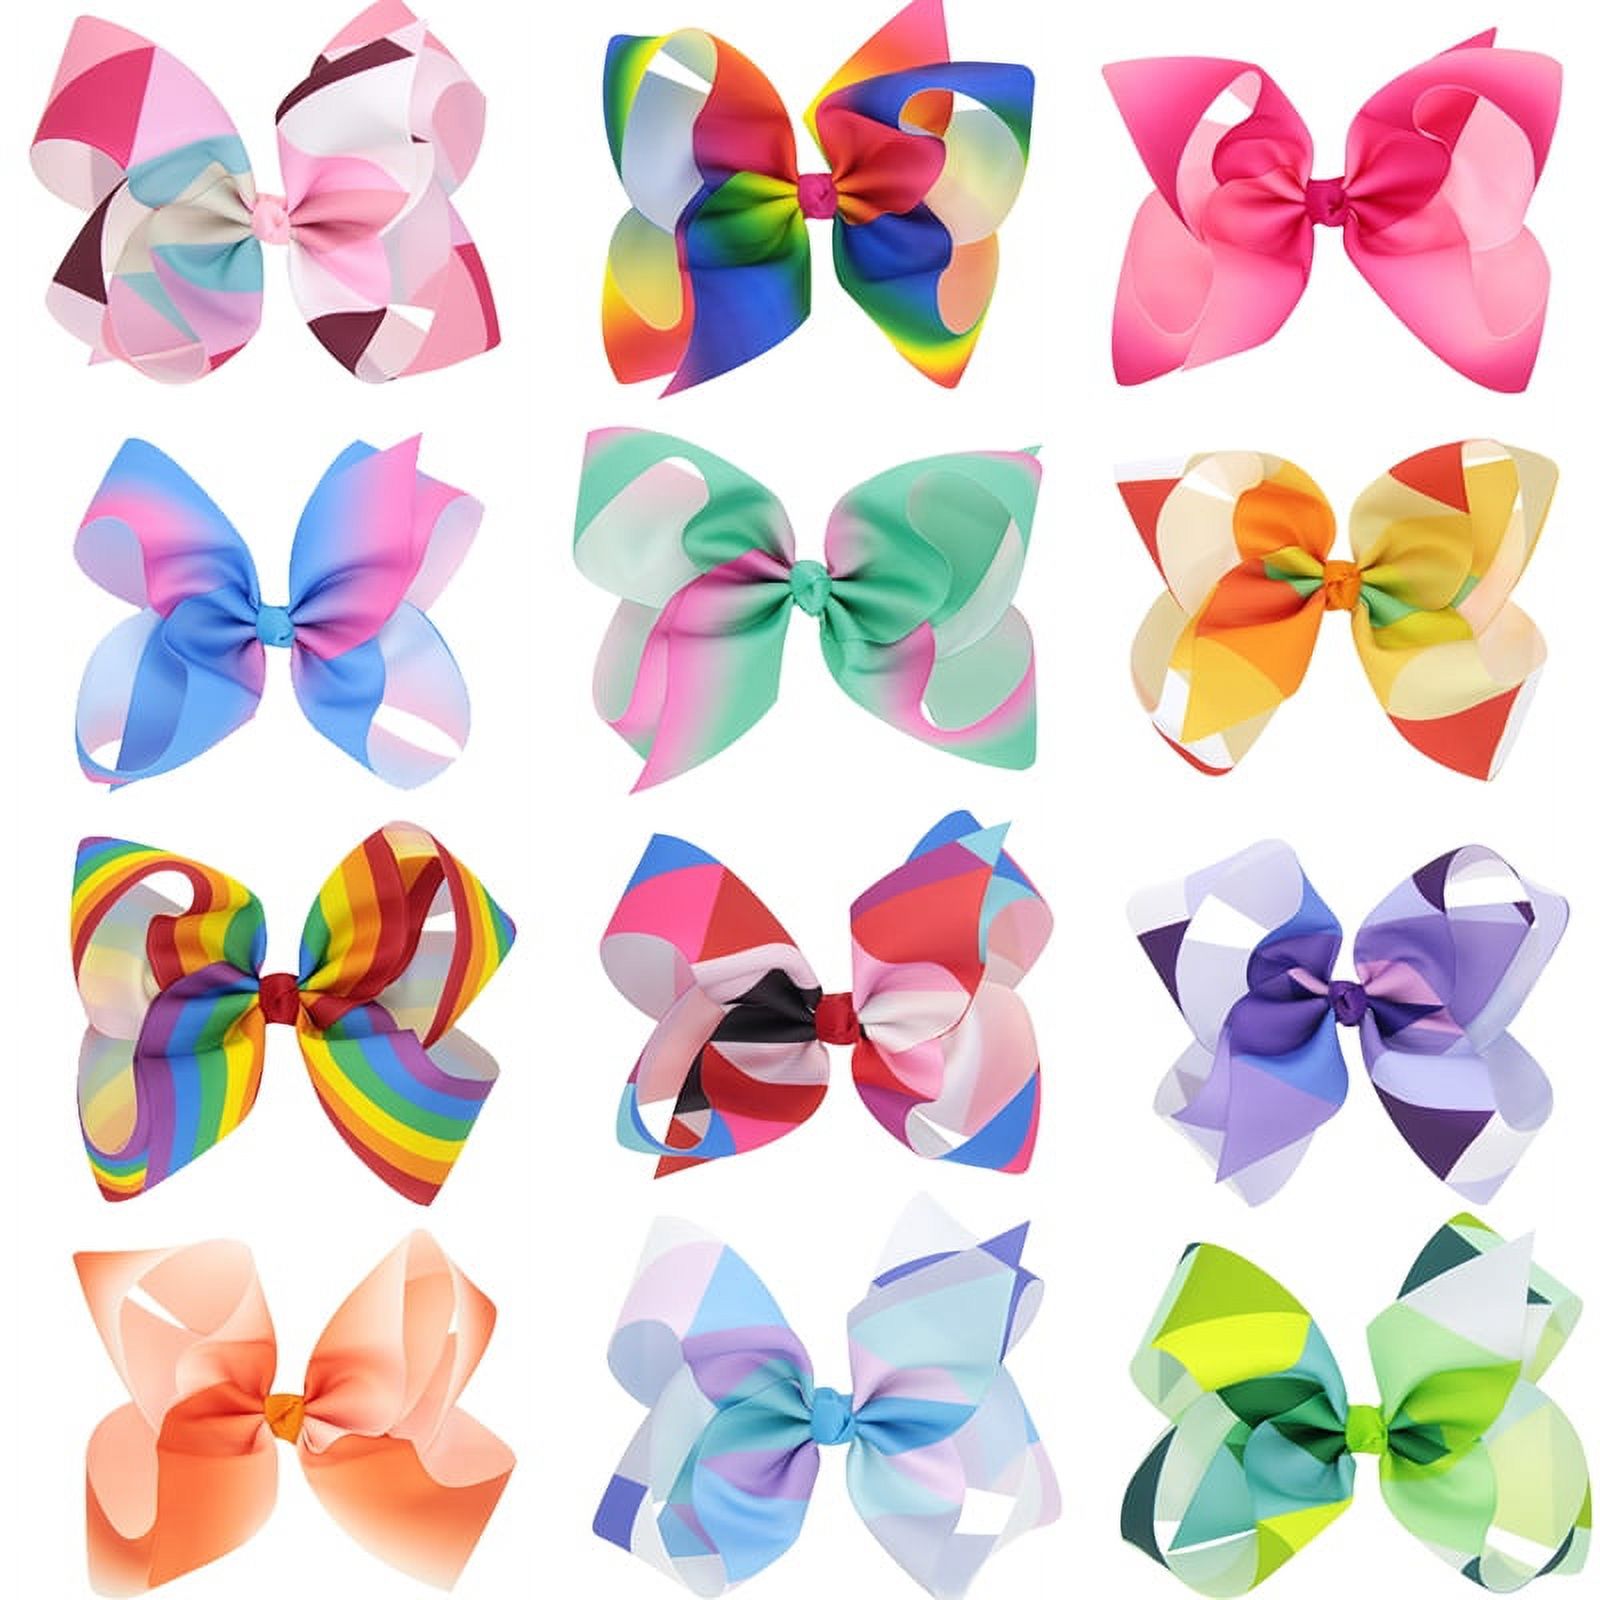 12Pcs Hair Clips, Multicolor Hair Barrettes Hair Bows Hair Pins Hair Accessories for Baby Girls Kids Teens Toddlers Children - image 1 of 6